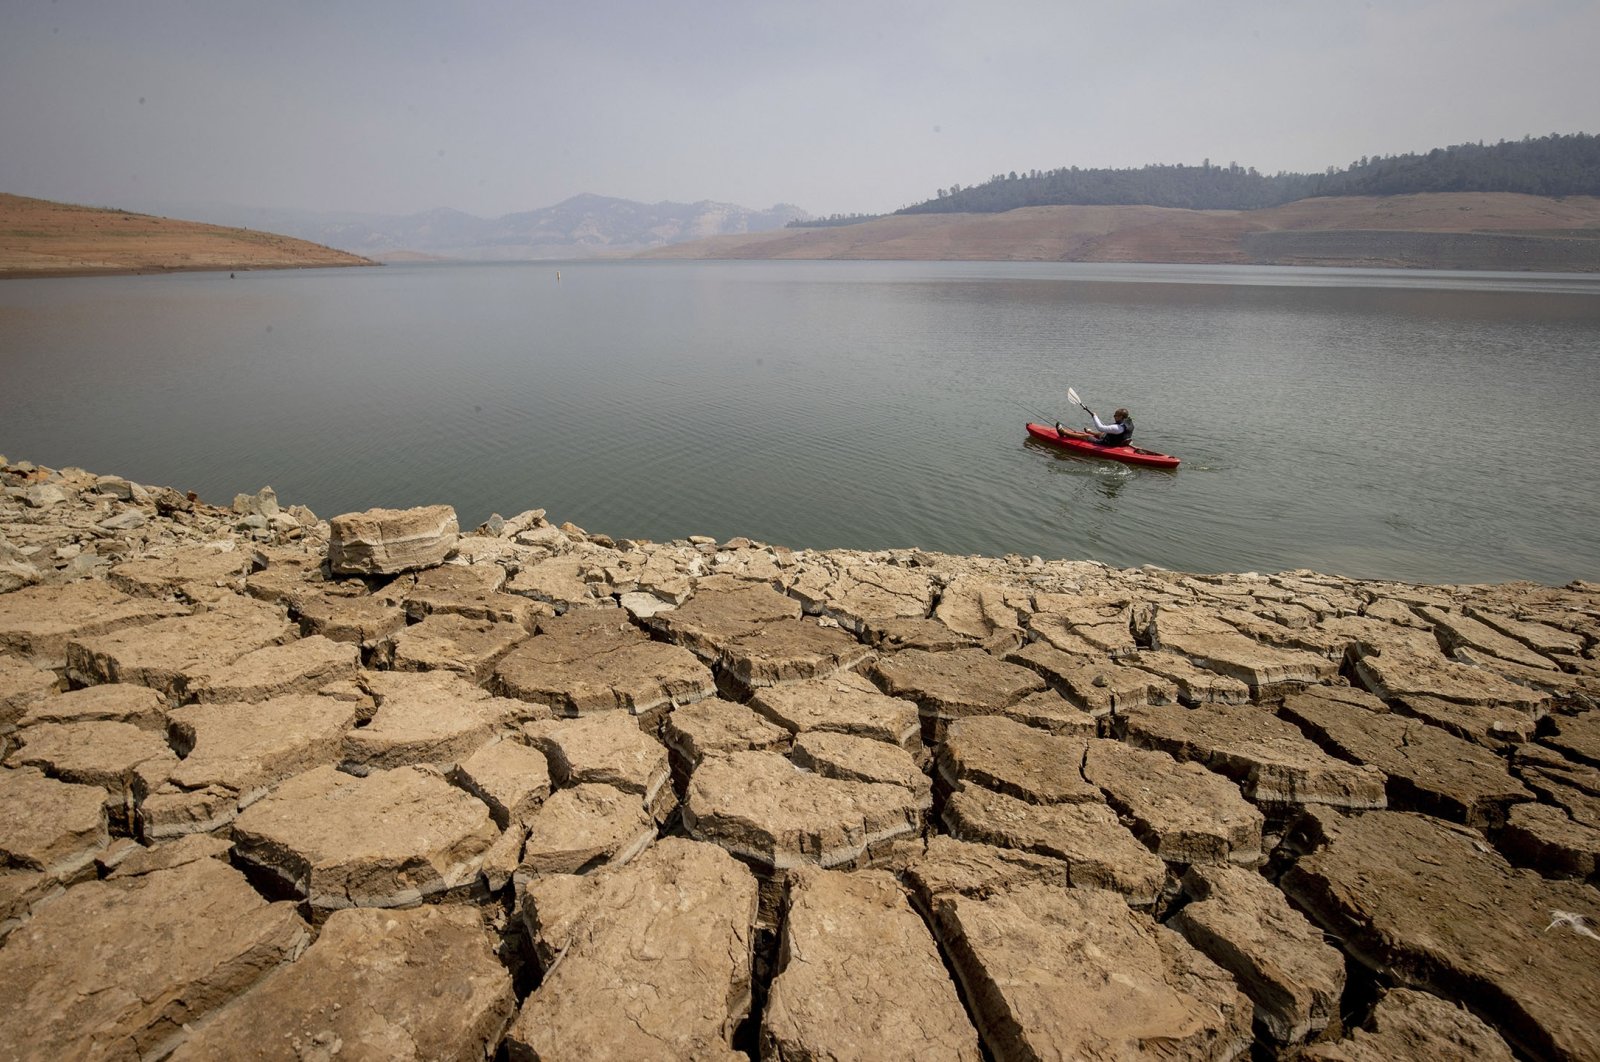 A kayaker paddles in Lake Oroville as water levels remain low due to continuing drought conditions in Oroville, California, U.S., Aug. 22, 2021. (AP Photo)